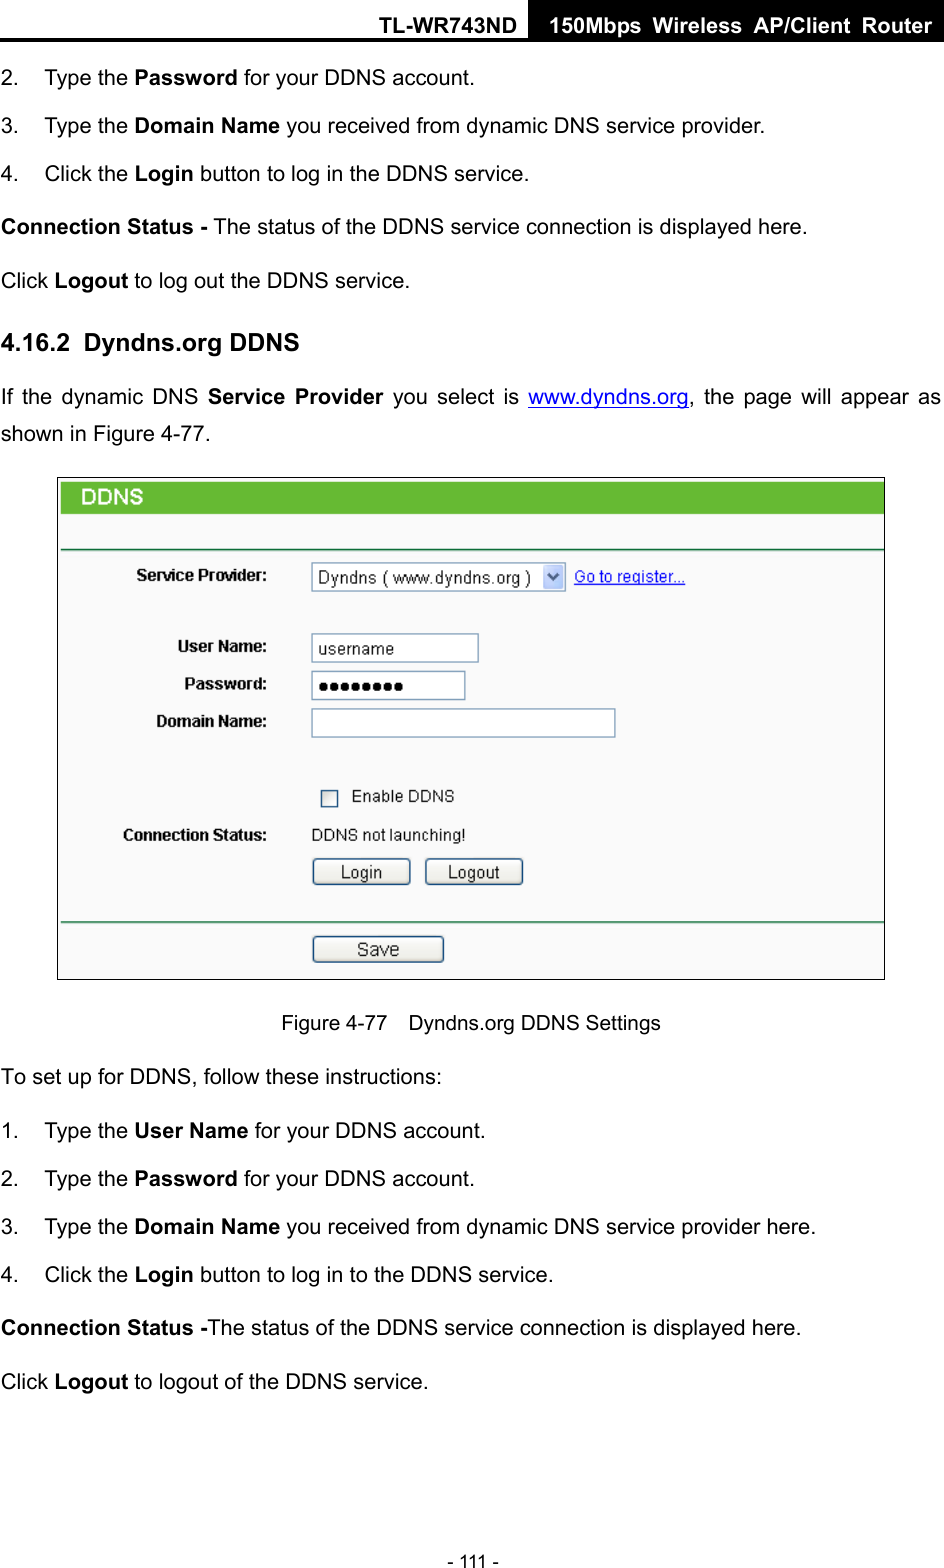 TL-WR743ND 150Mbps Wireless AP/Client Router - 111 - 2. Type the Password for your DDNS account.   3. Type the Domain Name you received from dynamic DNS service provider. 4. Click the Login button to log in the DDNS service. Connection Status - The status of the DDNS service connection is displayed here. Click Logout to log out the DDNS service. 4.16.2  Dyndns.org DDNS If the dynamic DNS Service Provider you select is www.dyndns.org, the page will appear as shown in Figure 4-77.  Figure 4-77    Dyndns.org DDNS Settings To set up for DDNS, follow these instructions: 1. Type the User Name for your DDNS account.   2. Type the Password for your DDNS account.   3. Type the Domain Name you received from dynamic DNS service provider here.   4. Click the Login button to log in to the DDNS service. Connection Status -The status of the DDNS service connection is displayed here. Click Logout to logout of the DDNS service.   